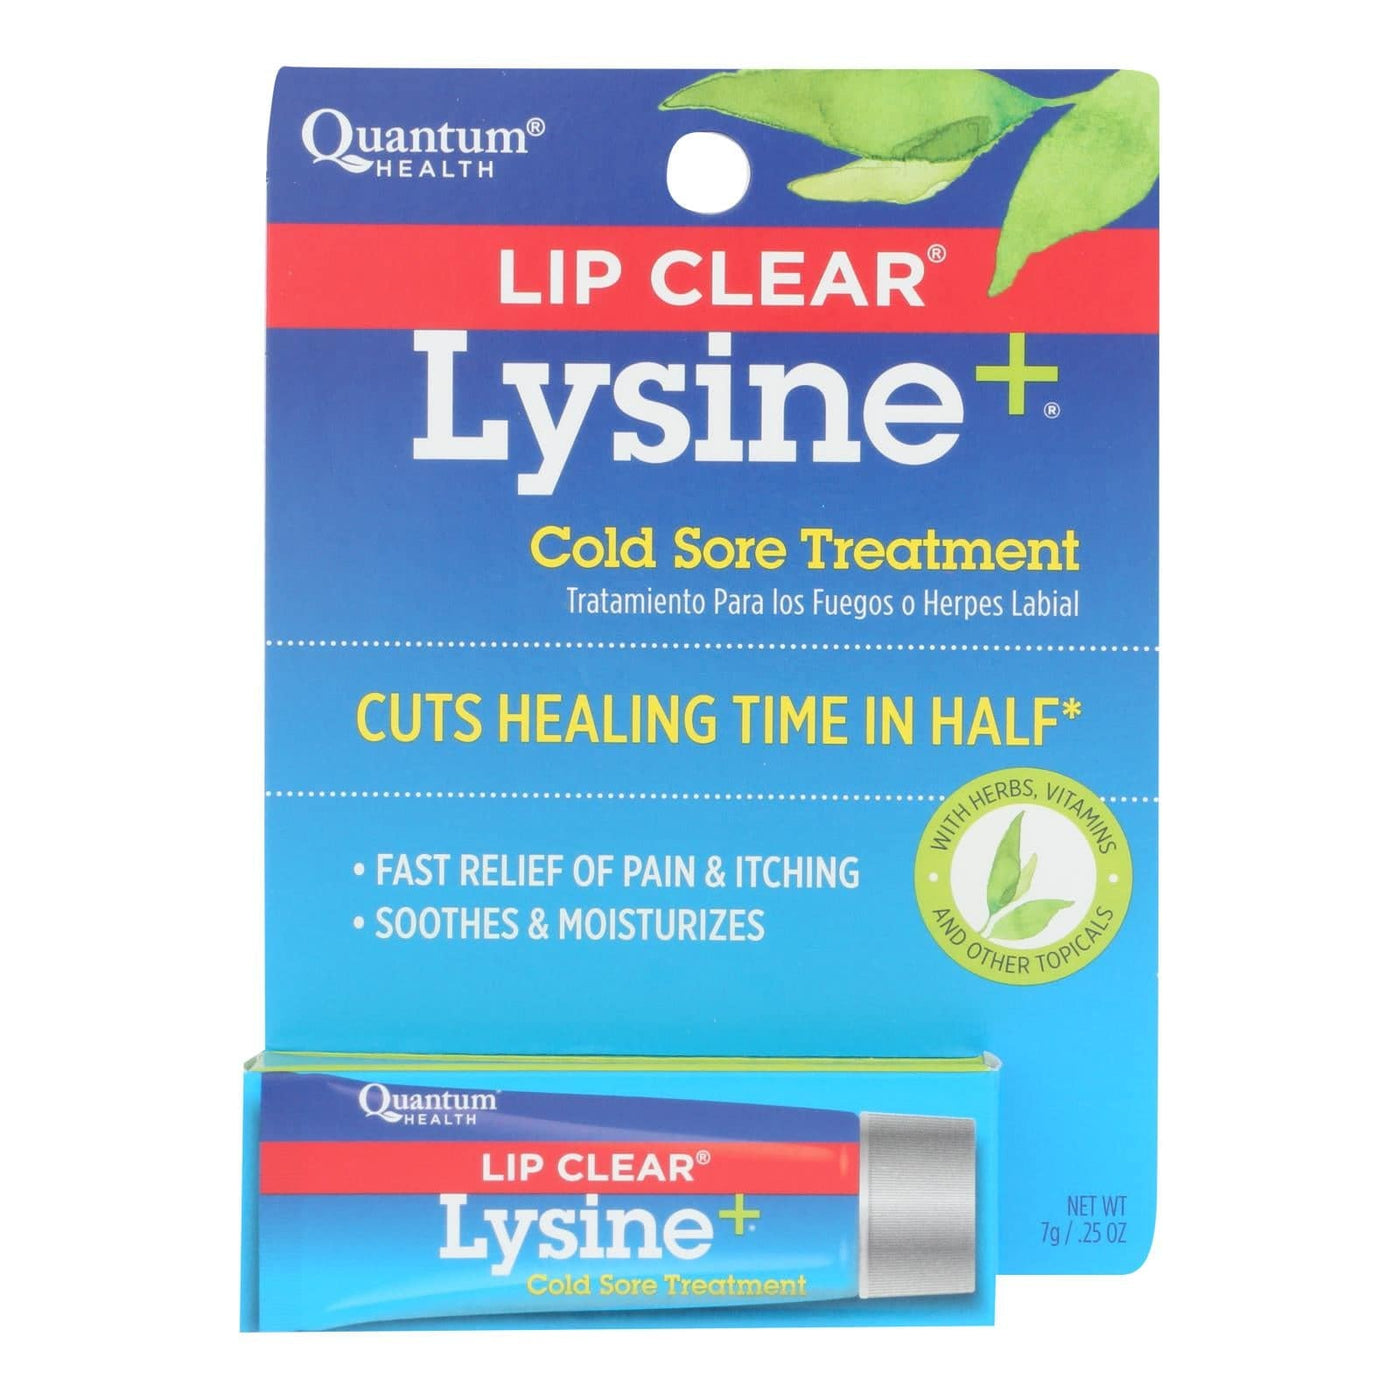 Buy Quantum Lipclear Lysine And Cold Sore Treatment All Natural Ointment - 0.25 Oz  at OnlyNaturals.us